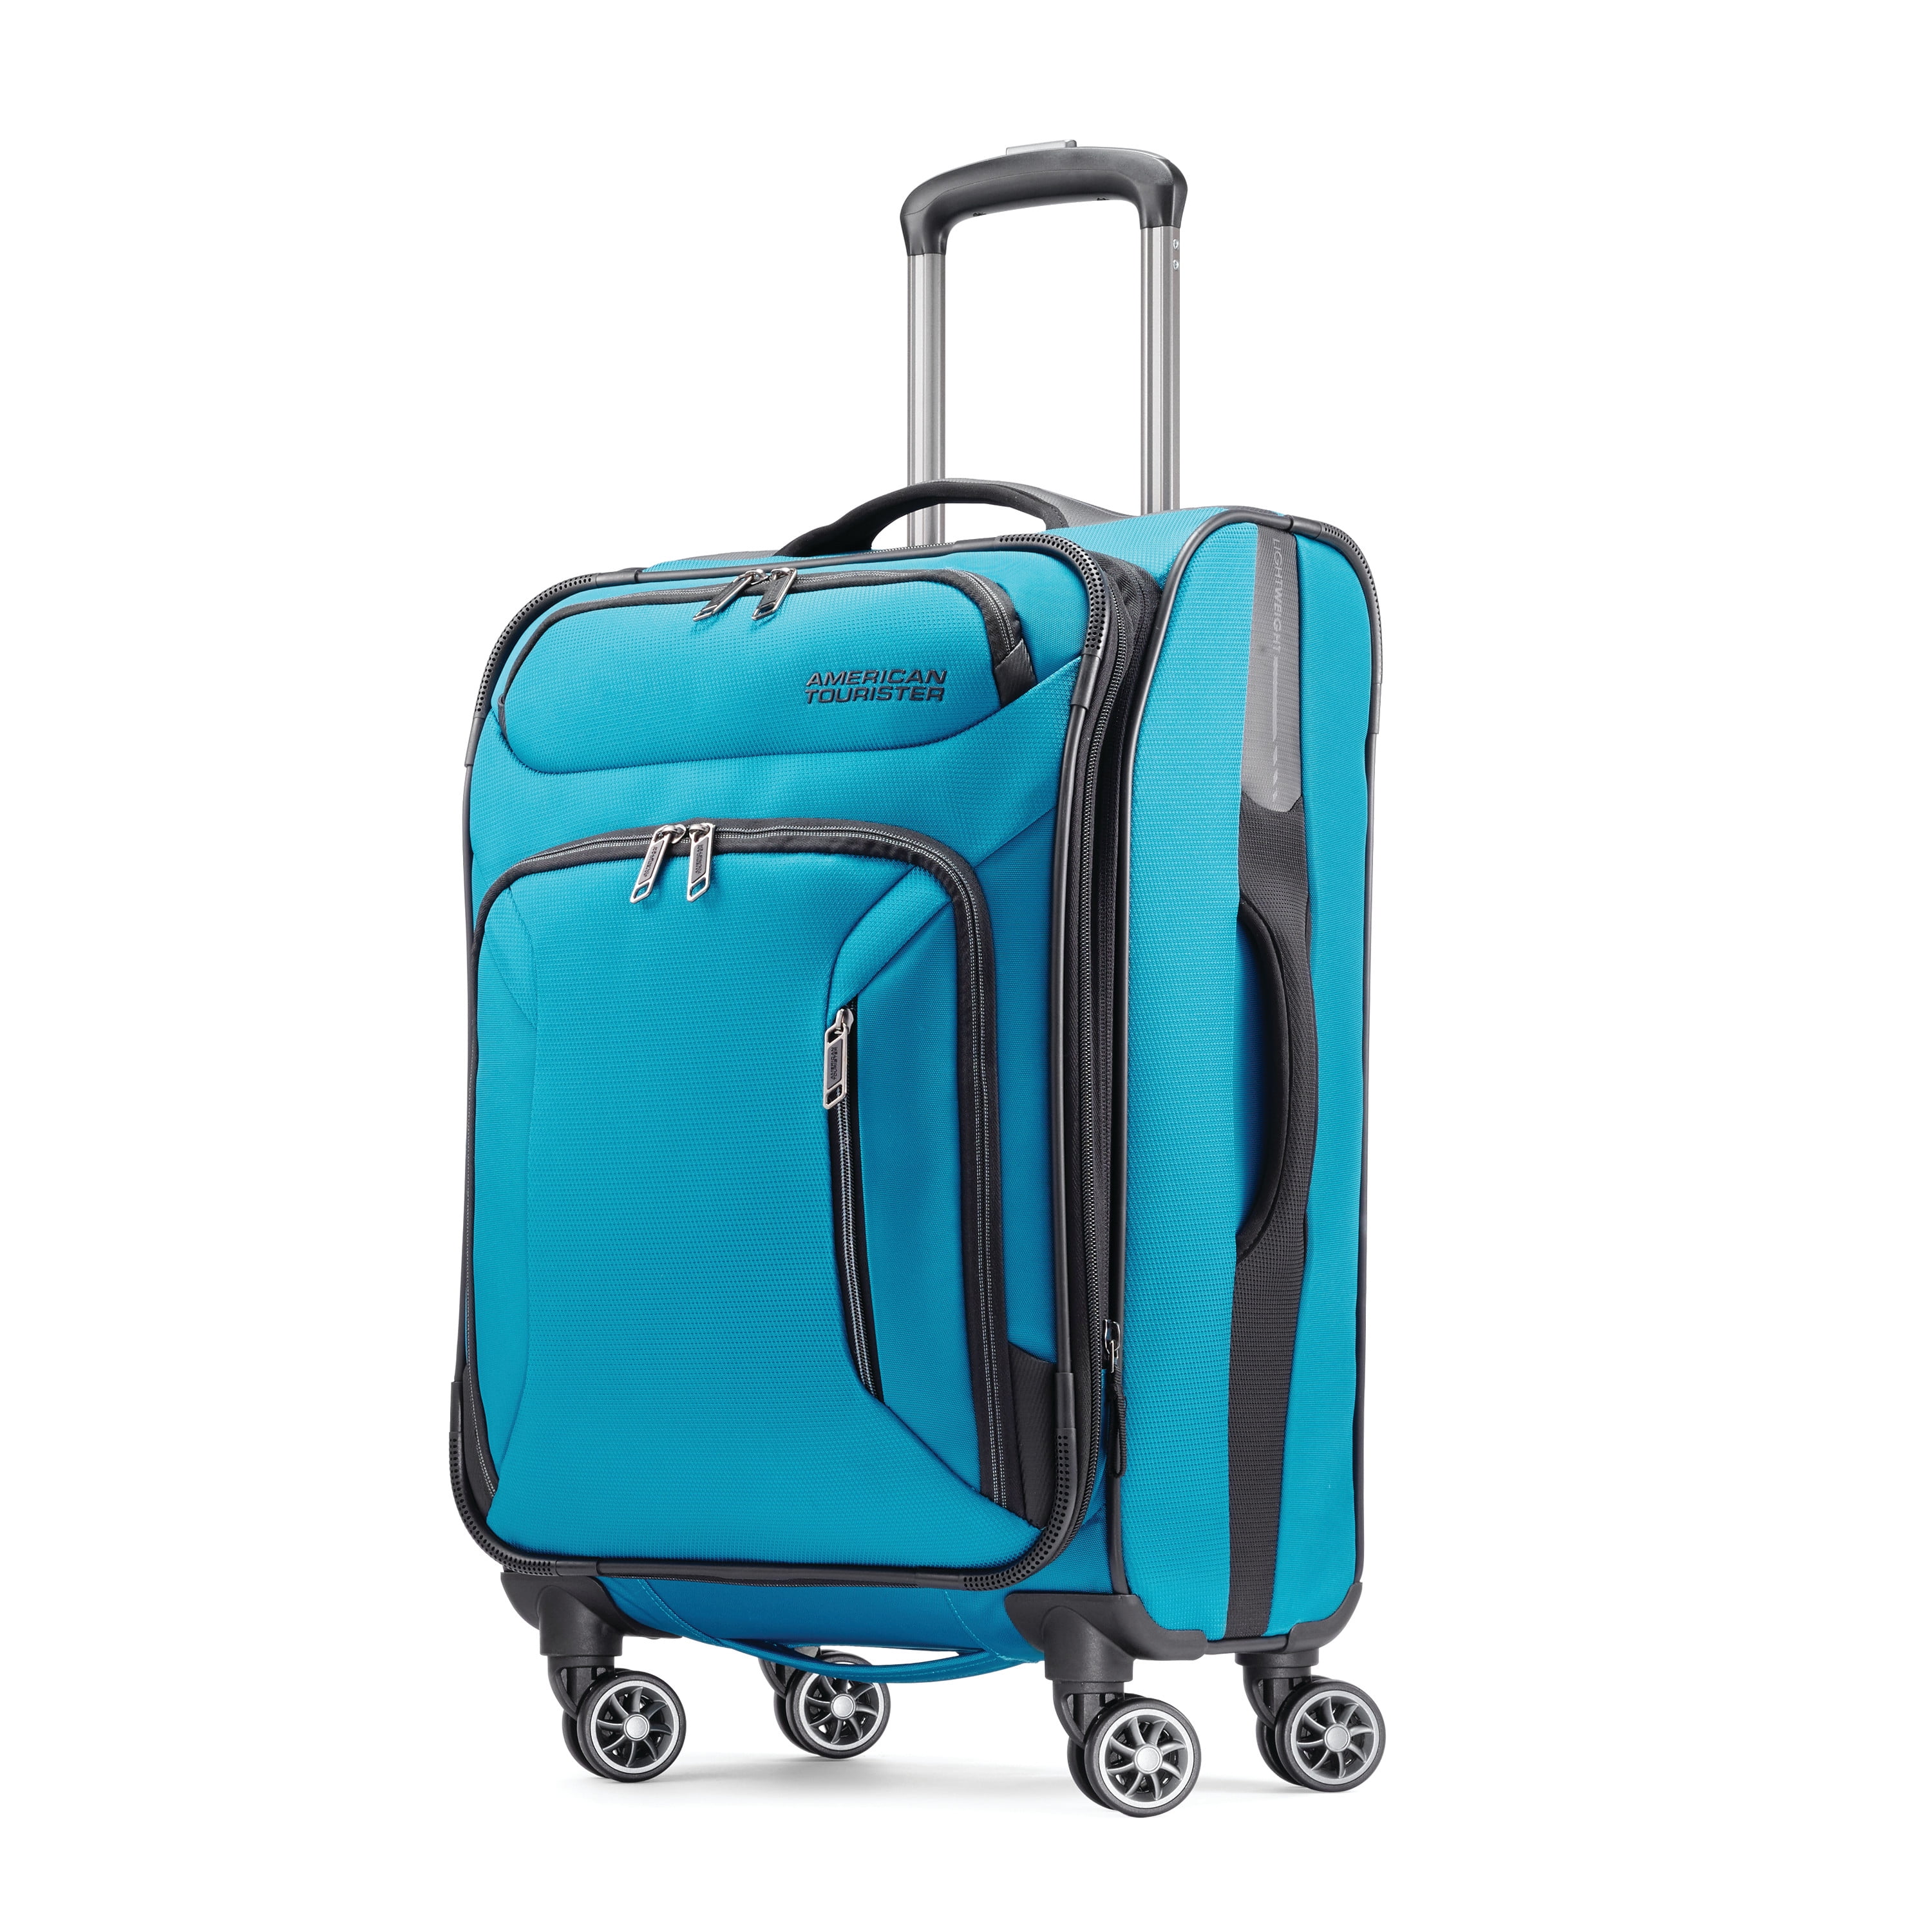 American Tourister Zoom Expandable Softside Luggage with Dual Spinner Wheels 